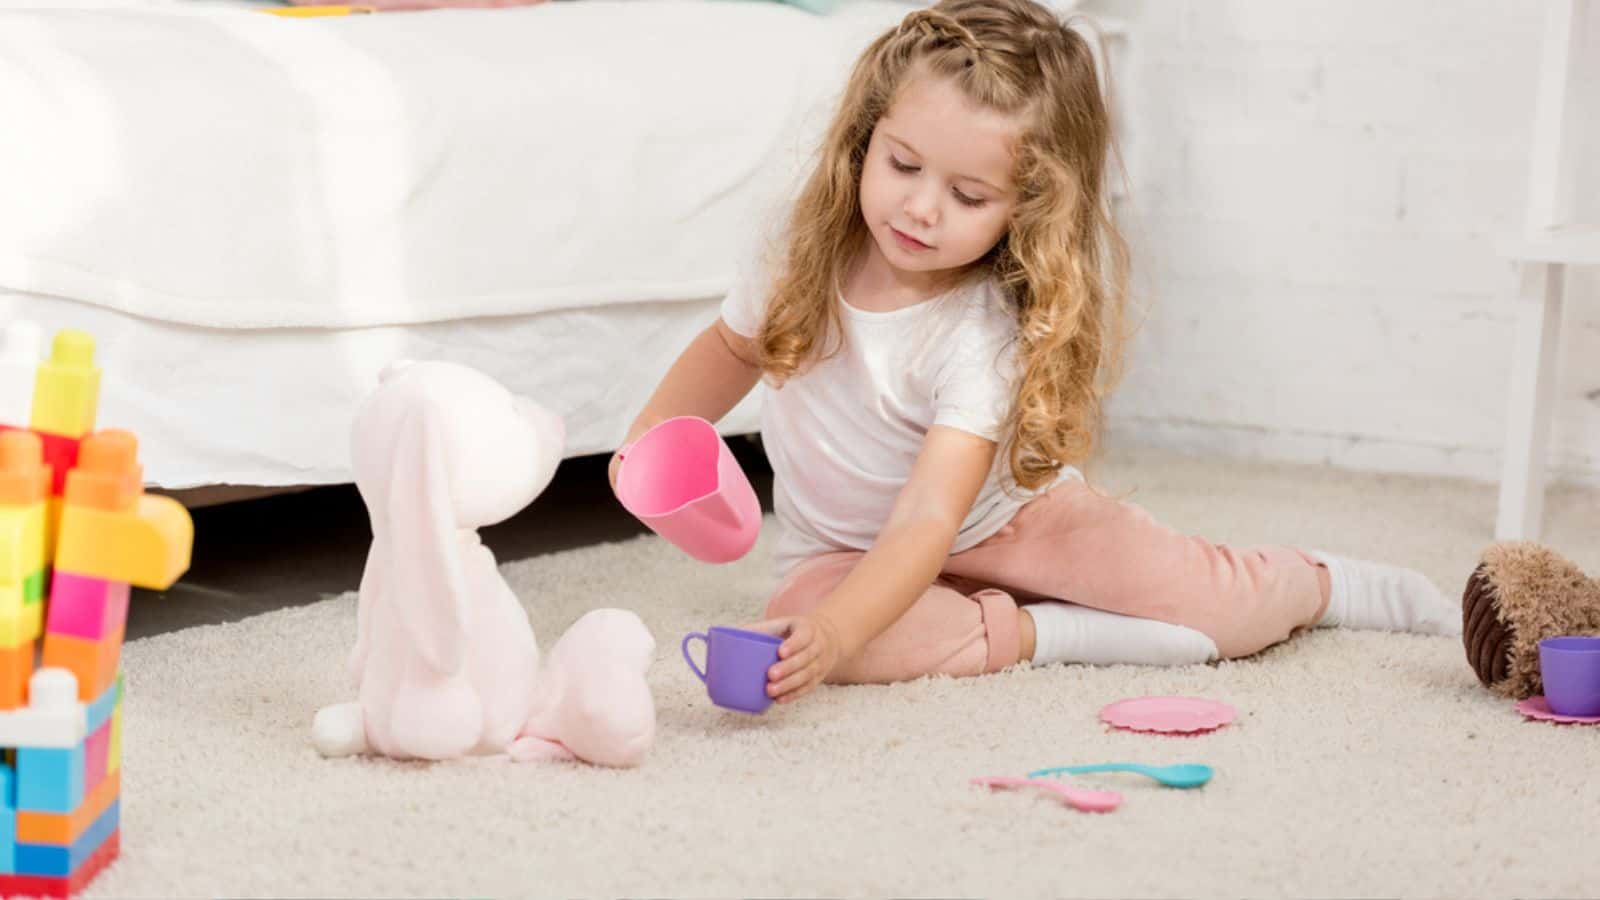 Adorable little girl playing with rabbit toy and plastic cups in children room